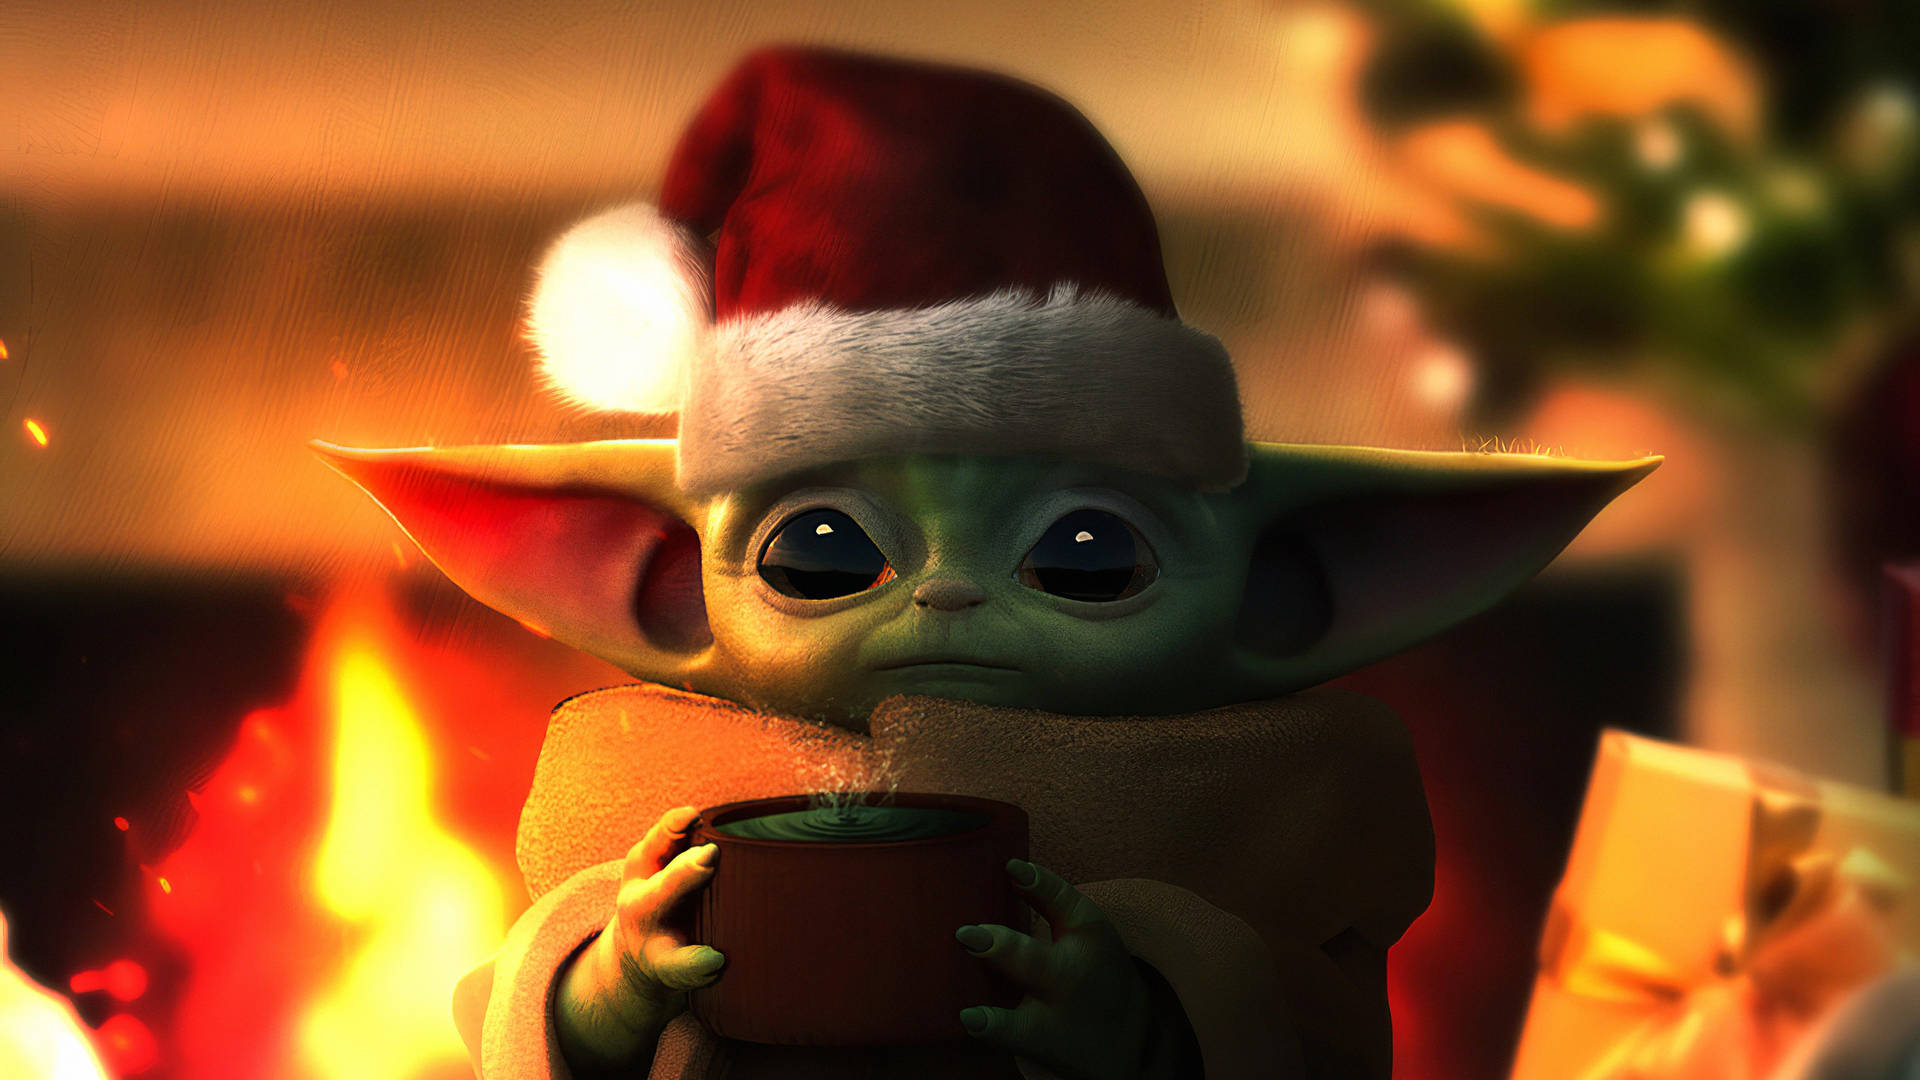 Celebrate the Holidays with a Star Wars Christmas Wallpaper